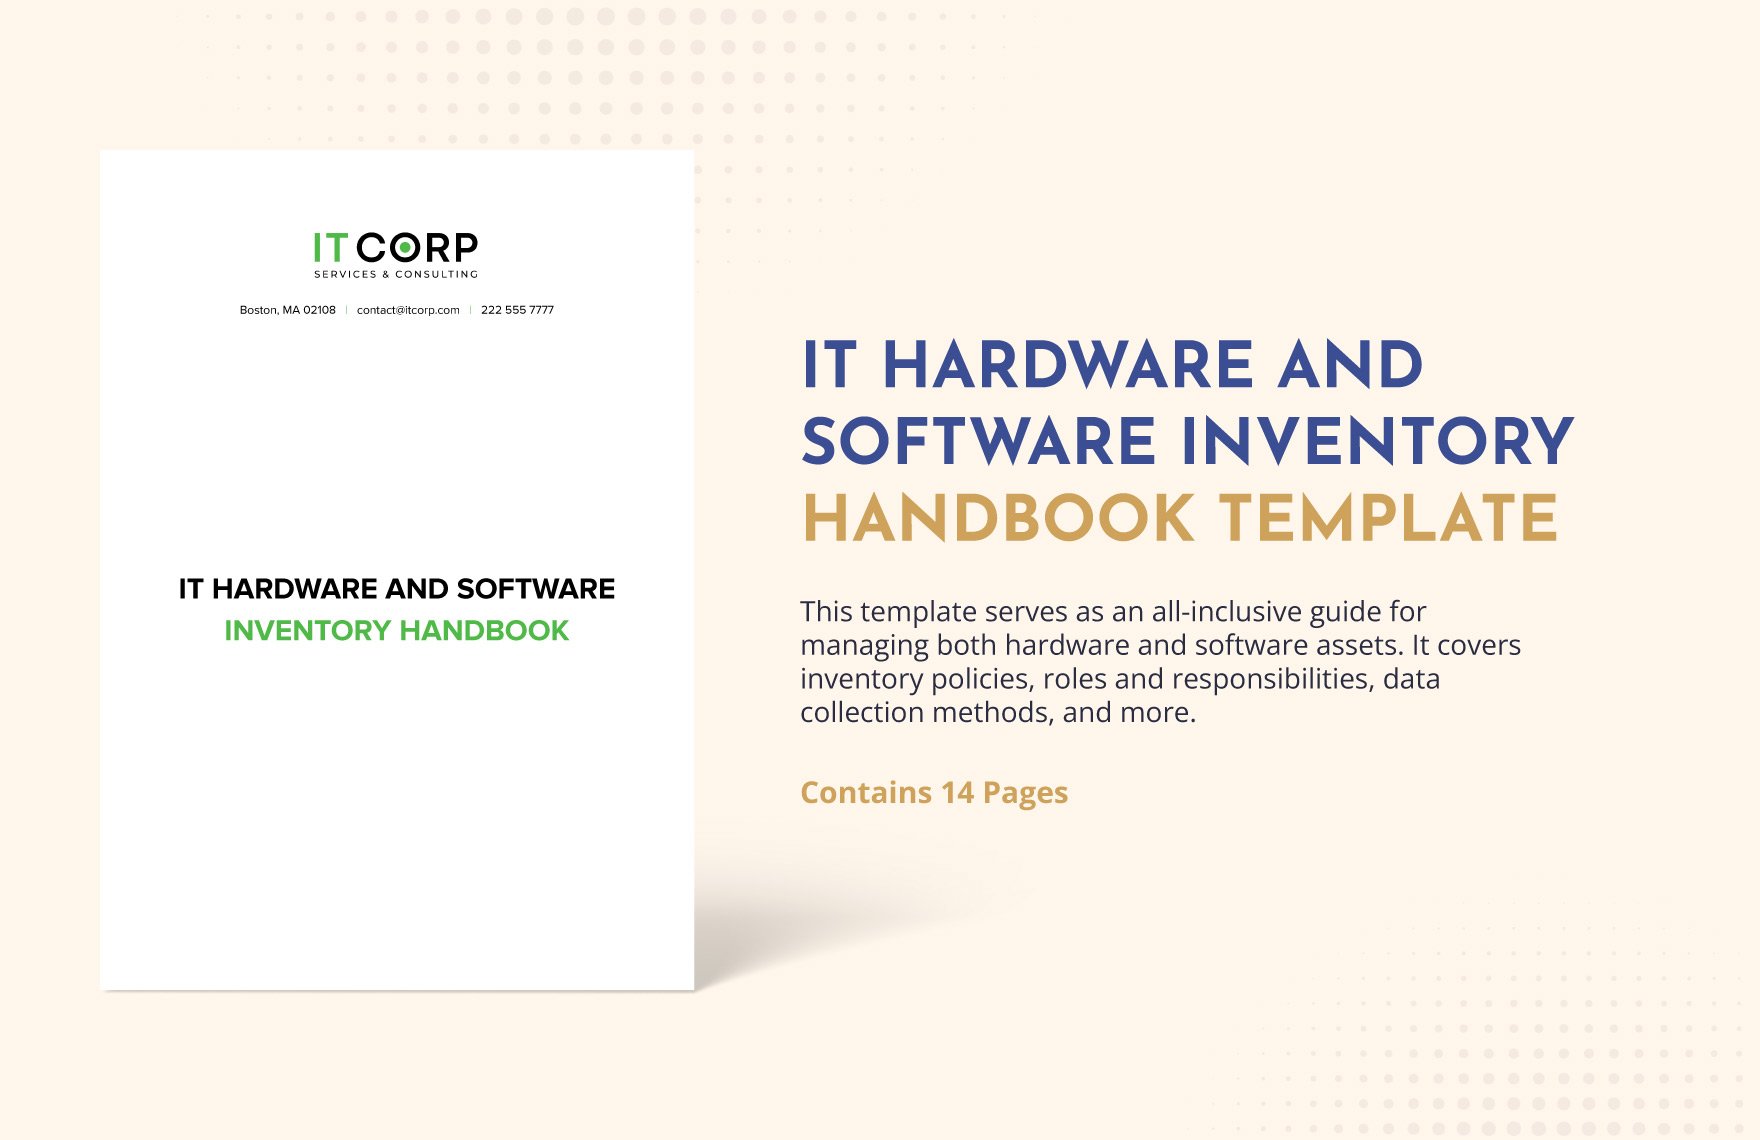 IT Hardware and Software Inventory Handbook Template